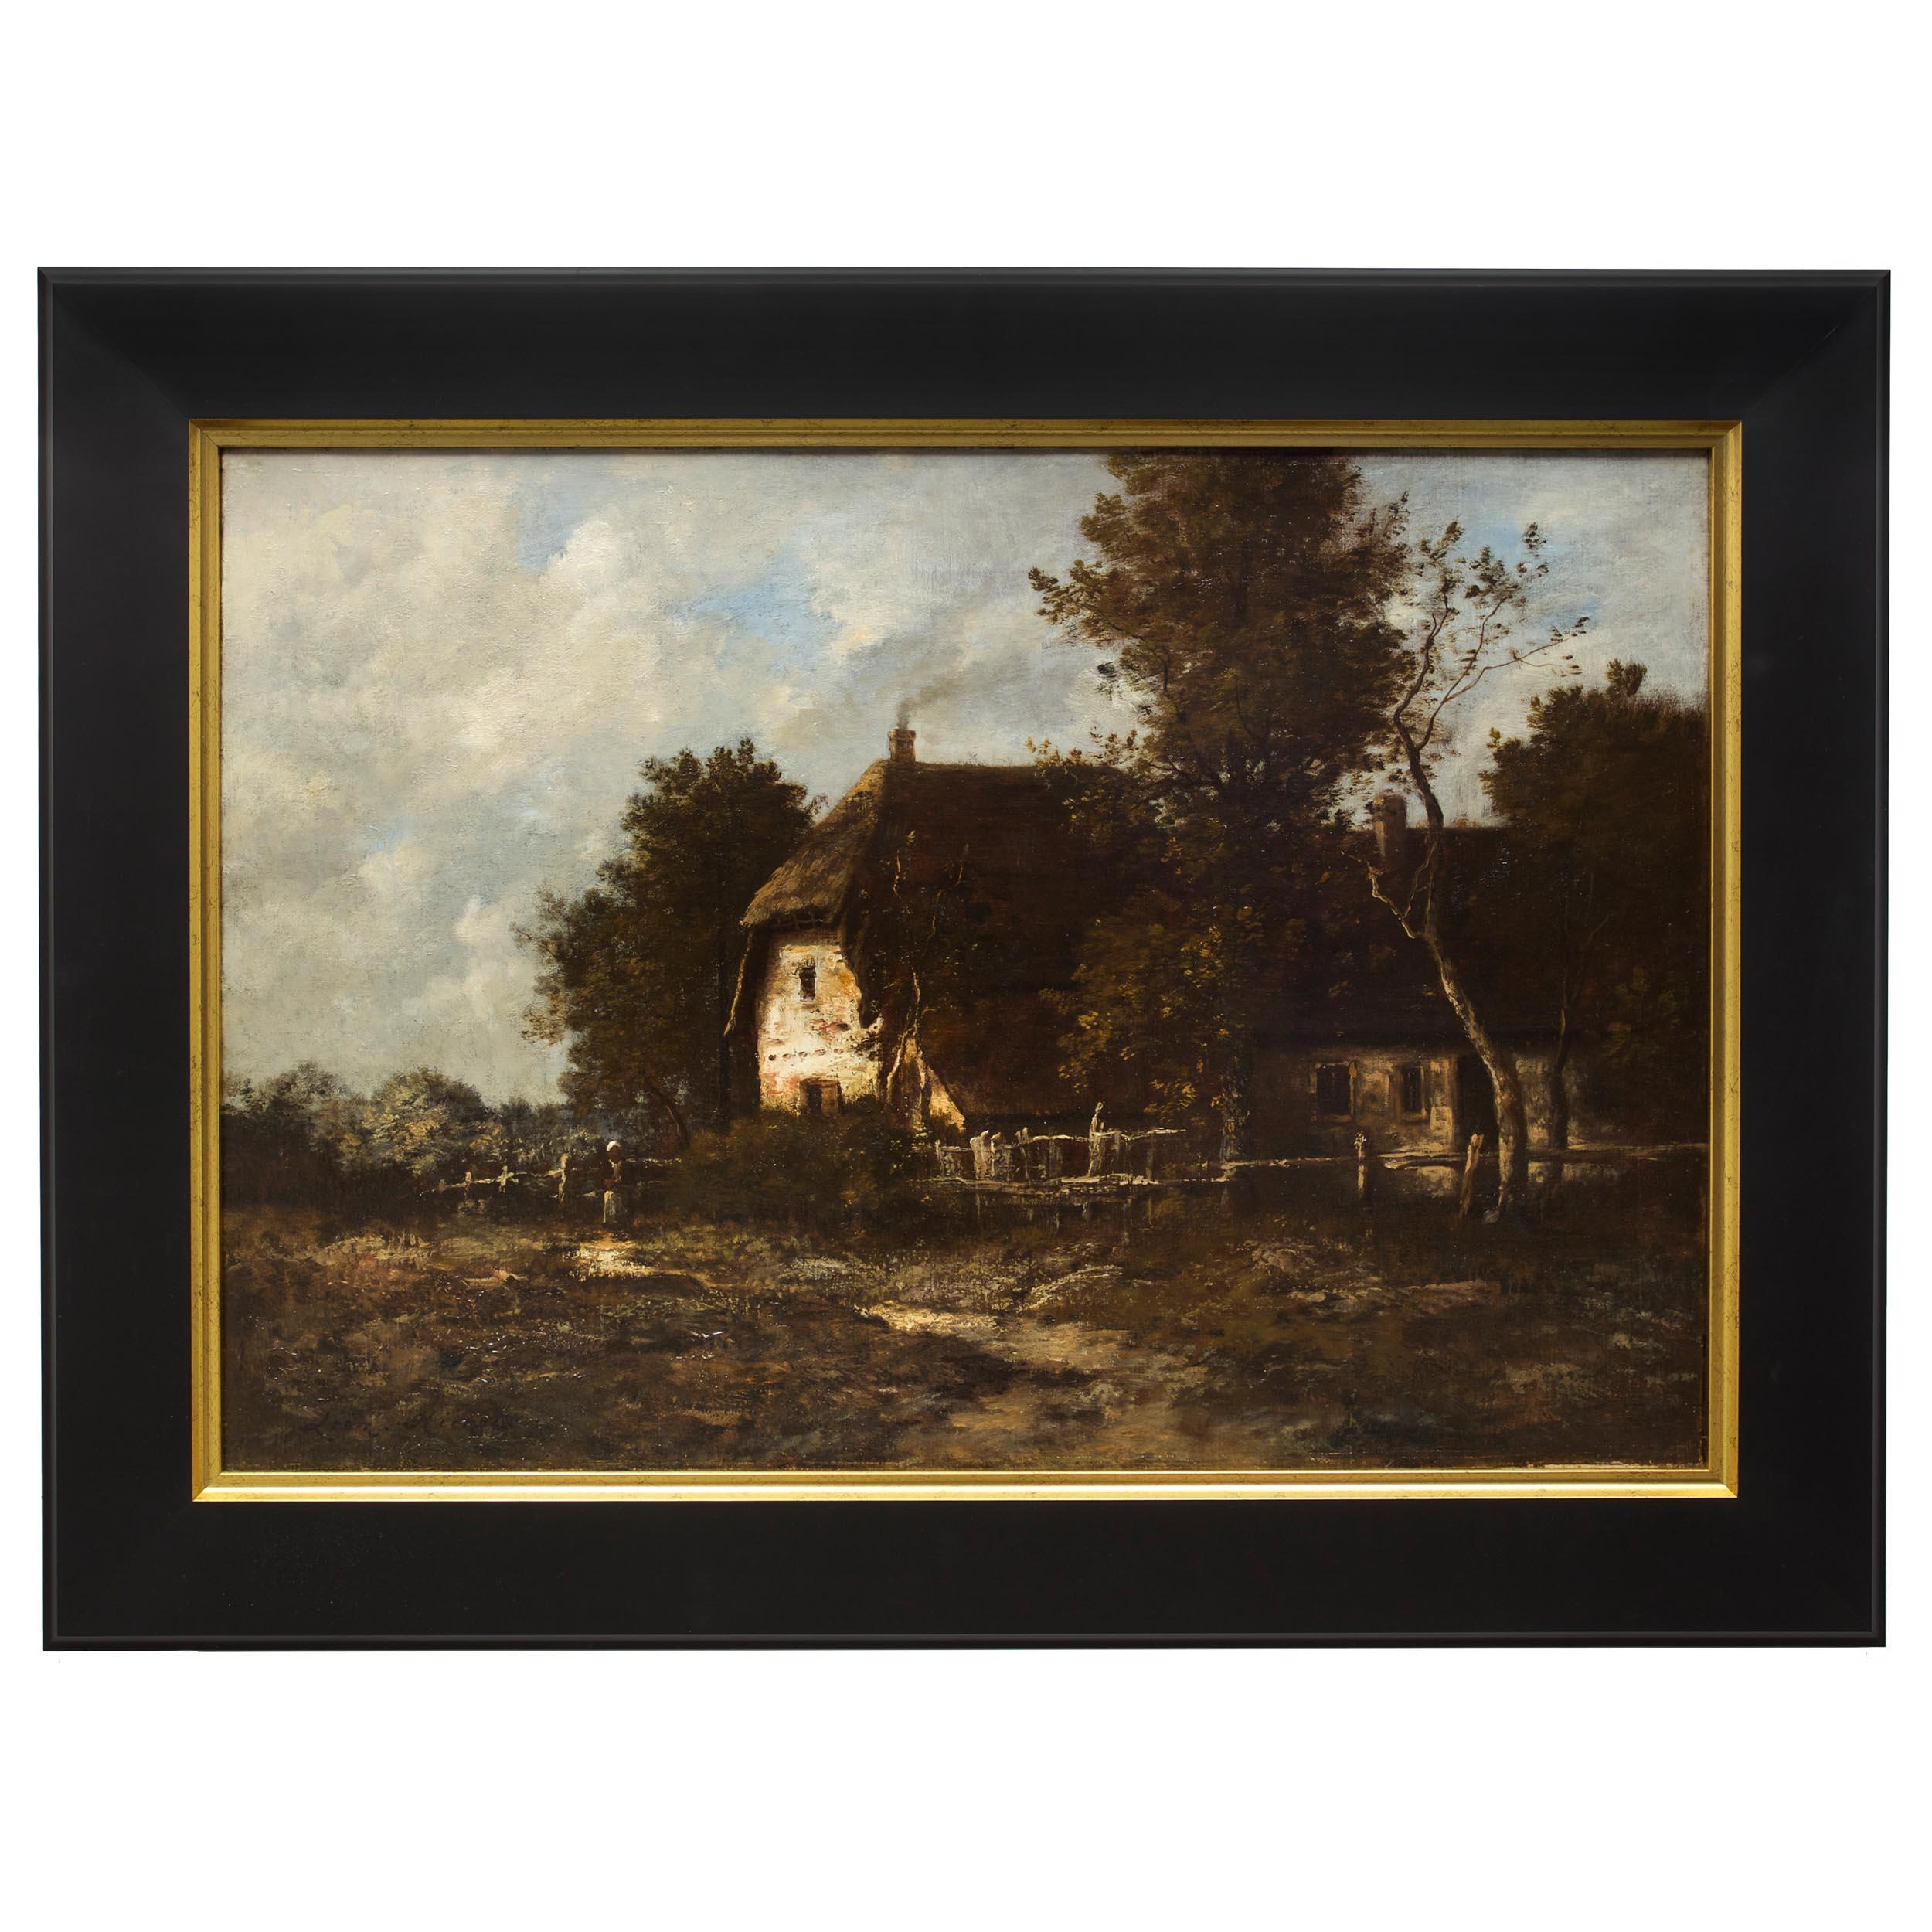 A very fine landscape scene of a rural farm house, a dirt path meanders through autumnal grasses before a rickety fence lining the property of the stone and stucco farm house with its thatched roof. A lone peasant woman stands before a group of